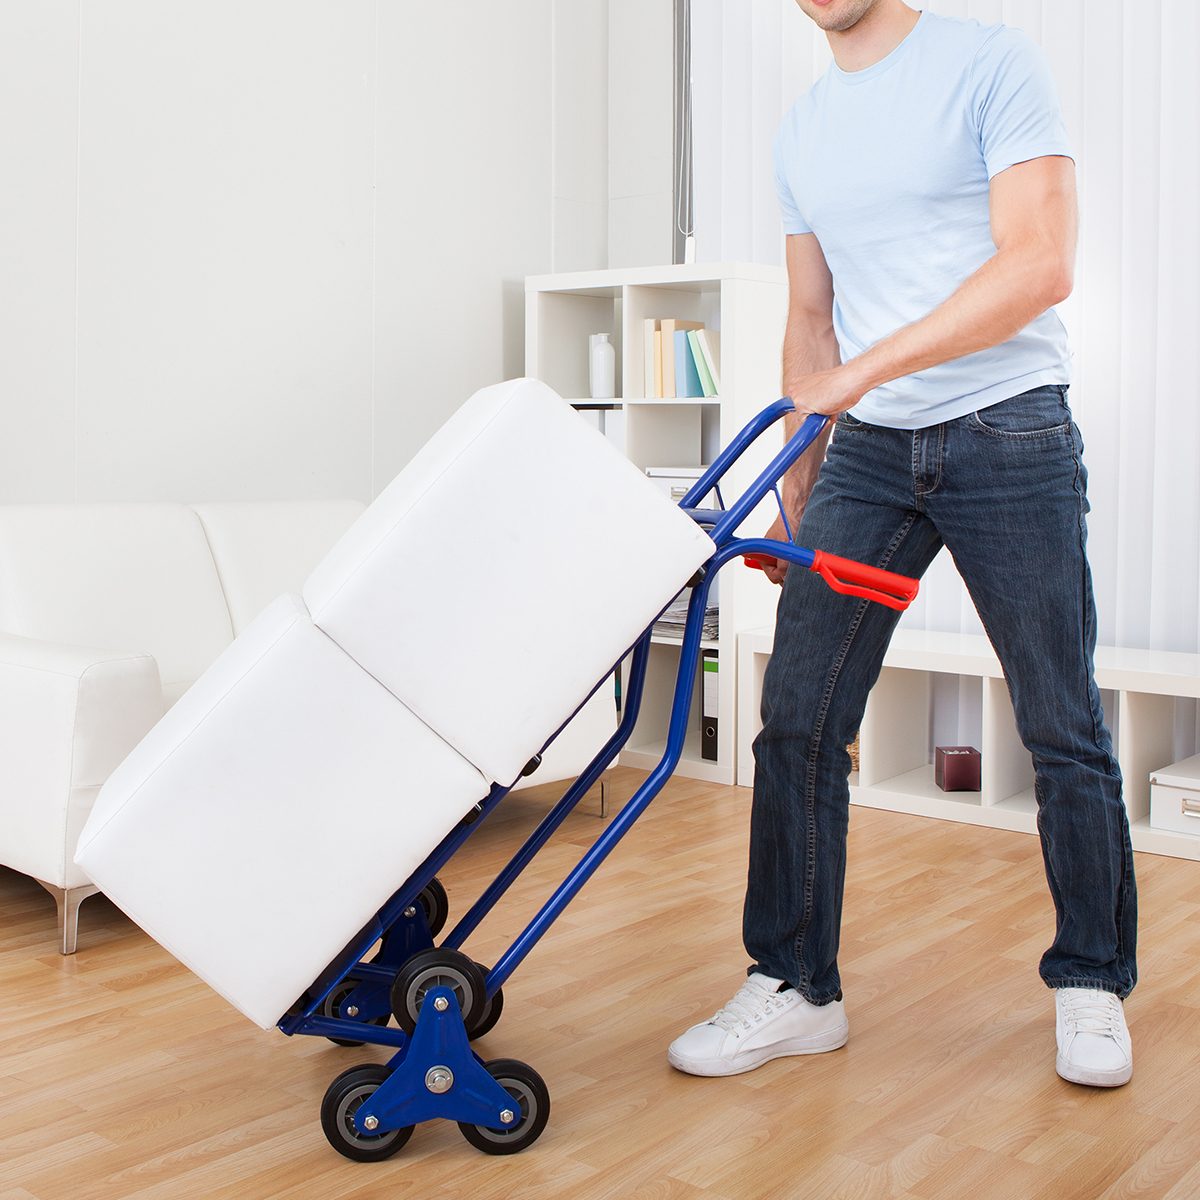 Your #1 Guide To Furniture Moving Dollies: Types, Benefits, Where